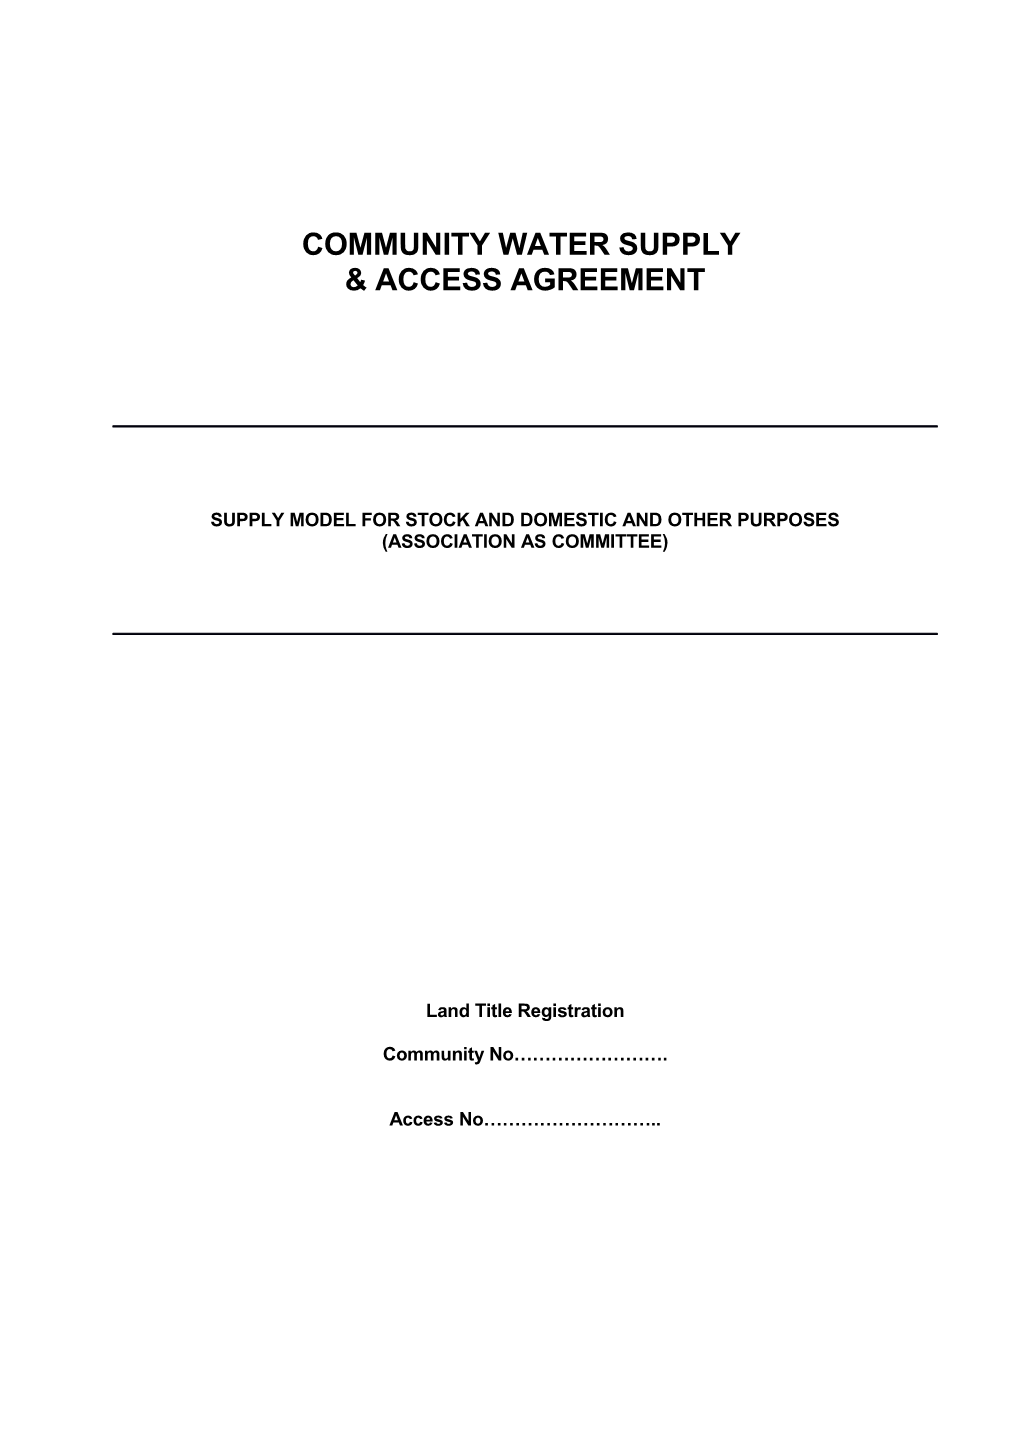 Community Water Supply & Access Agreement Stock & Domestic